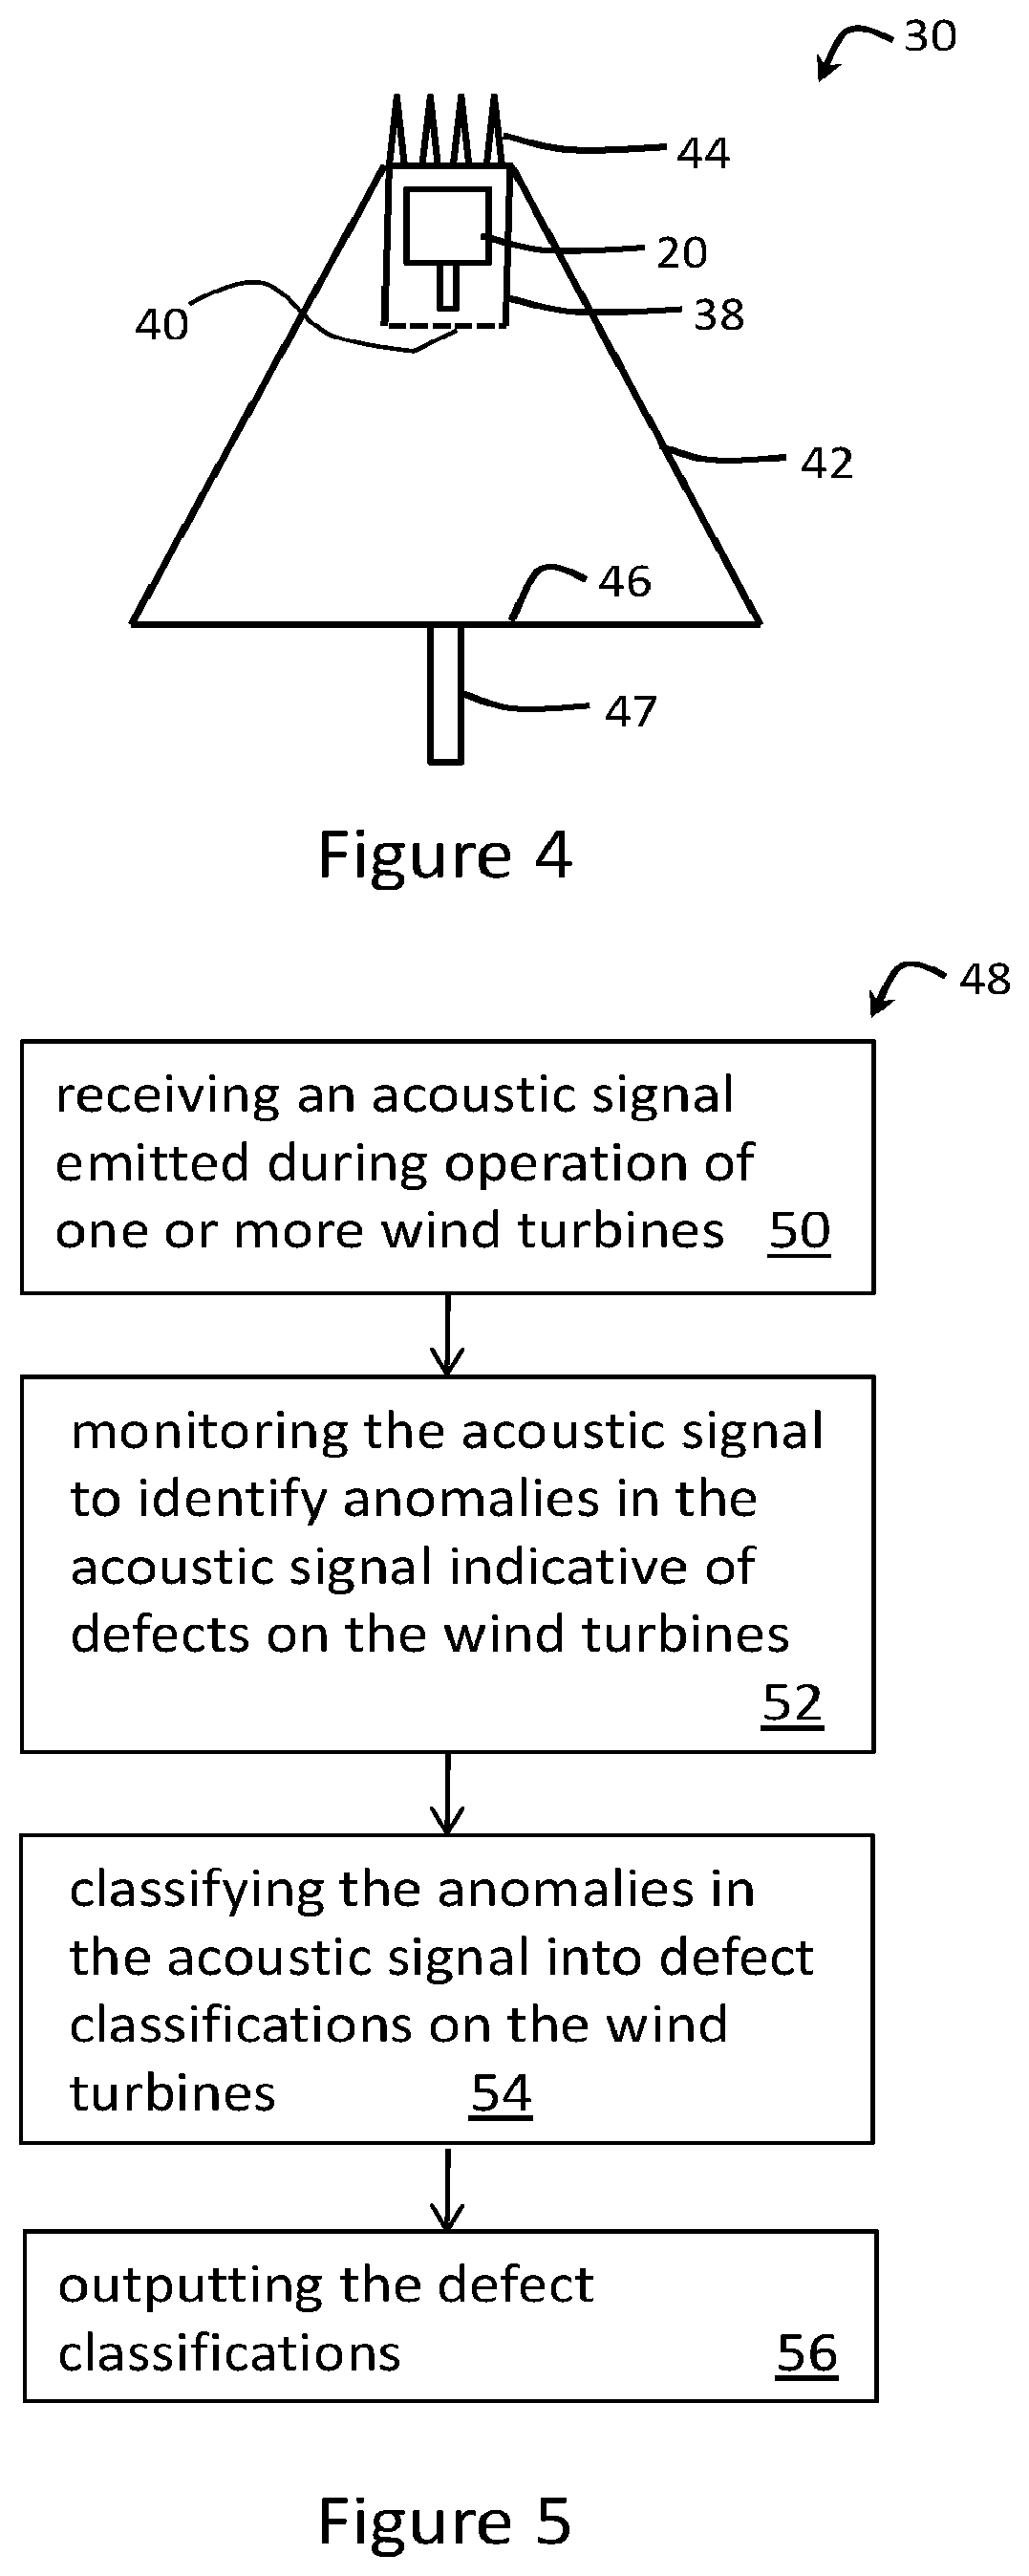 Apparatus and Method of Detecting Anomalies in an Acoustic Signal